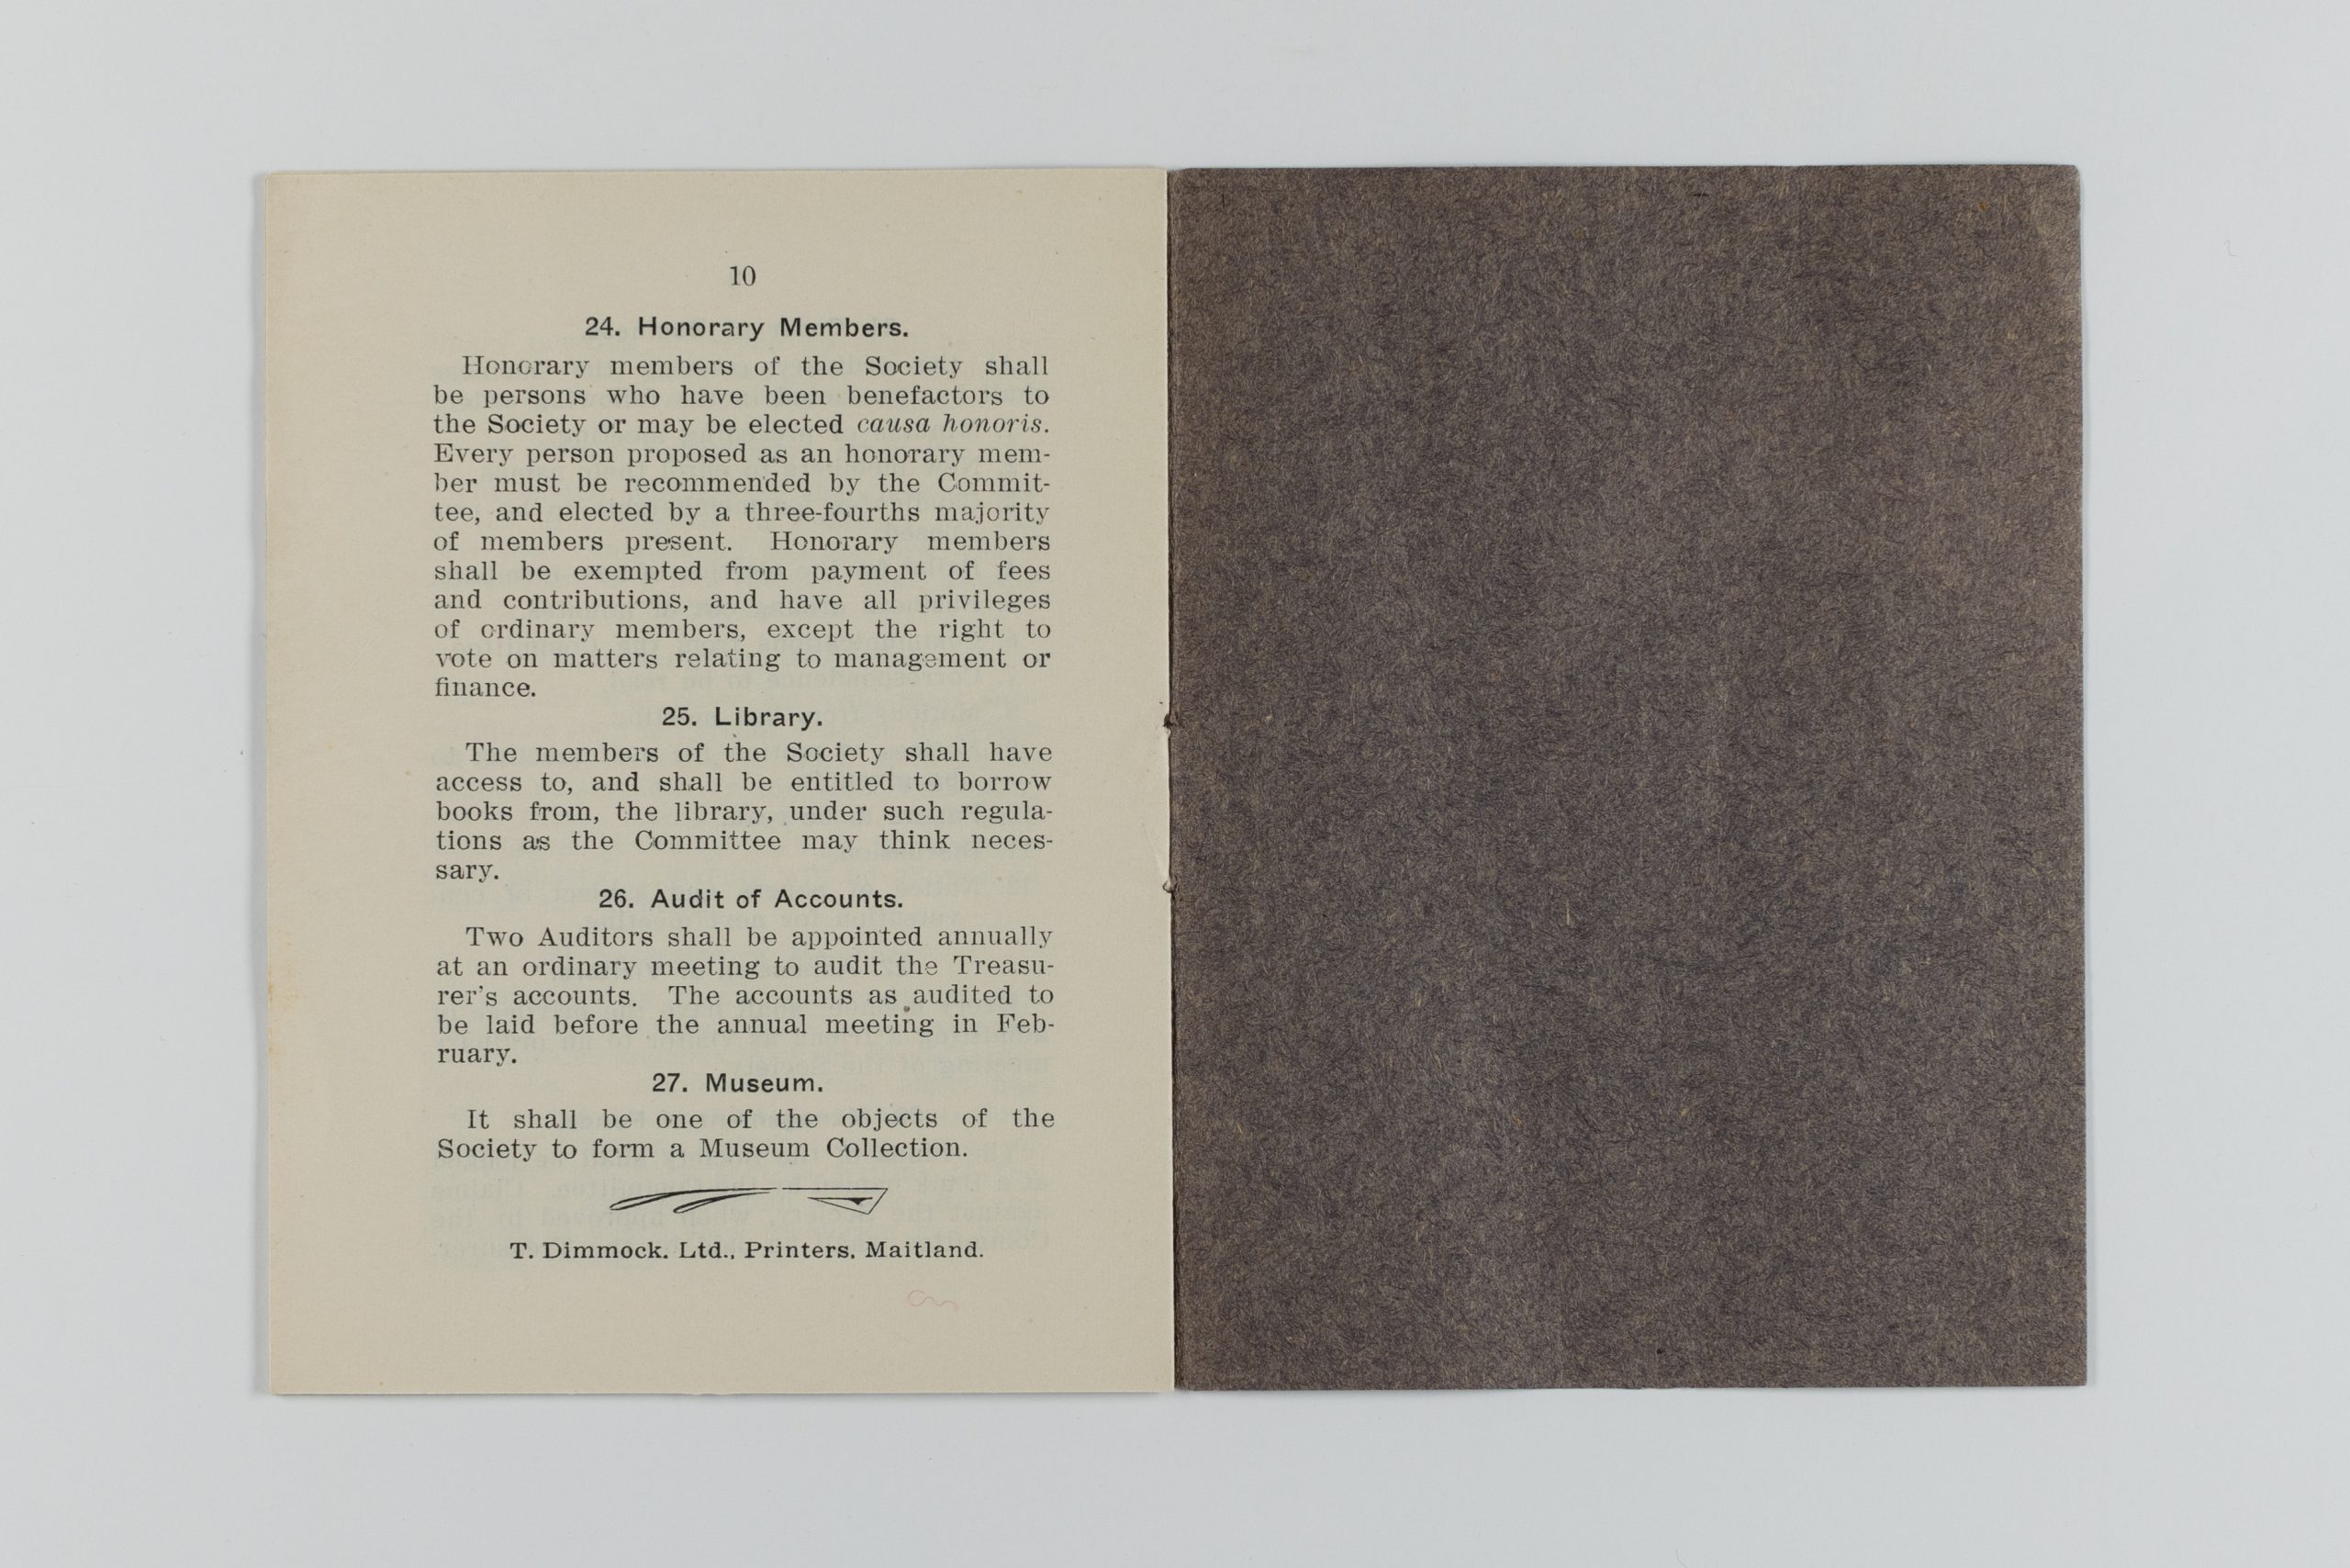 Printed book with brown cover opened to the final page. It showcases rules 24-27, including establishing honorary members, open access to the library, a yearly audit, and that an object from the society would open a museum.